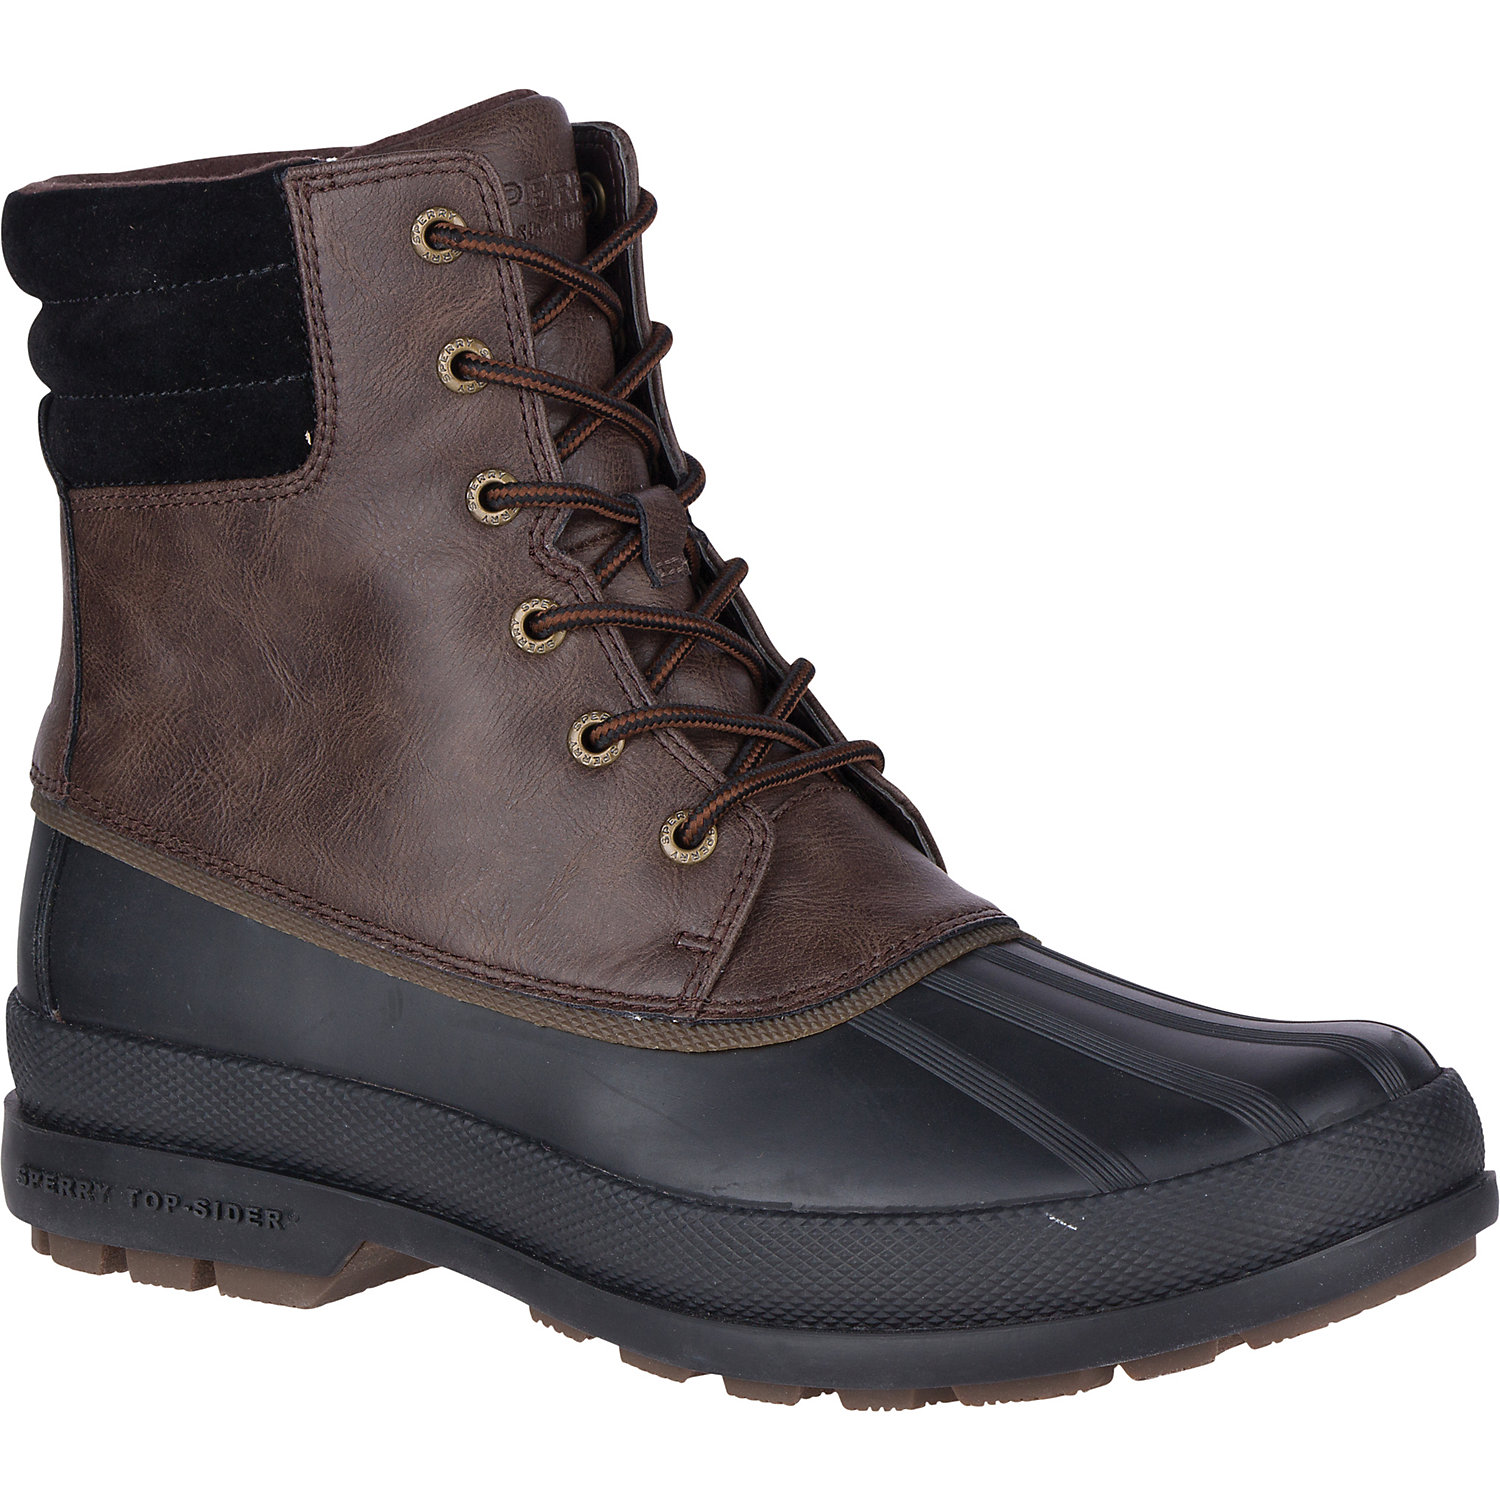 Sperry Mens Cold Bay Boot